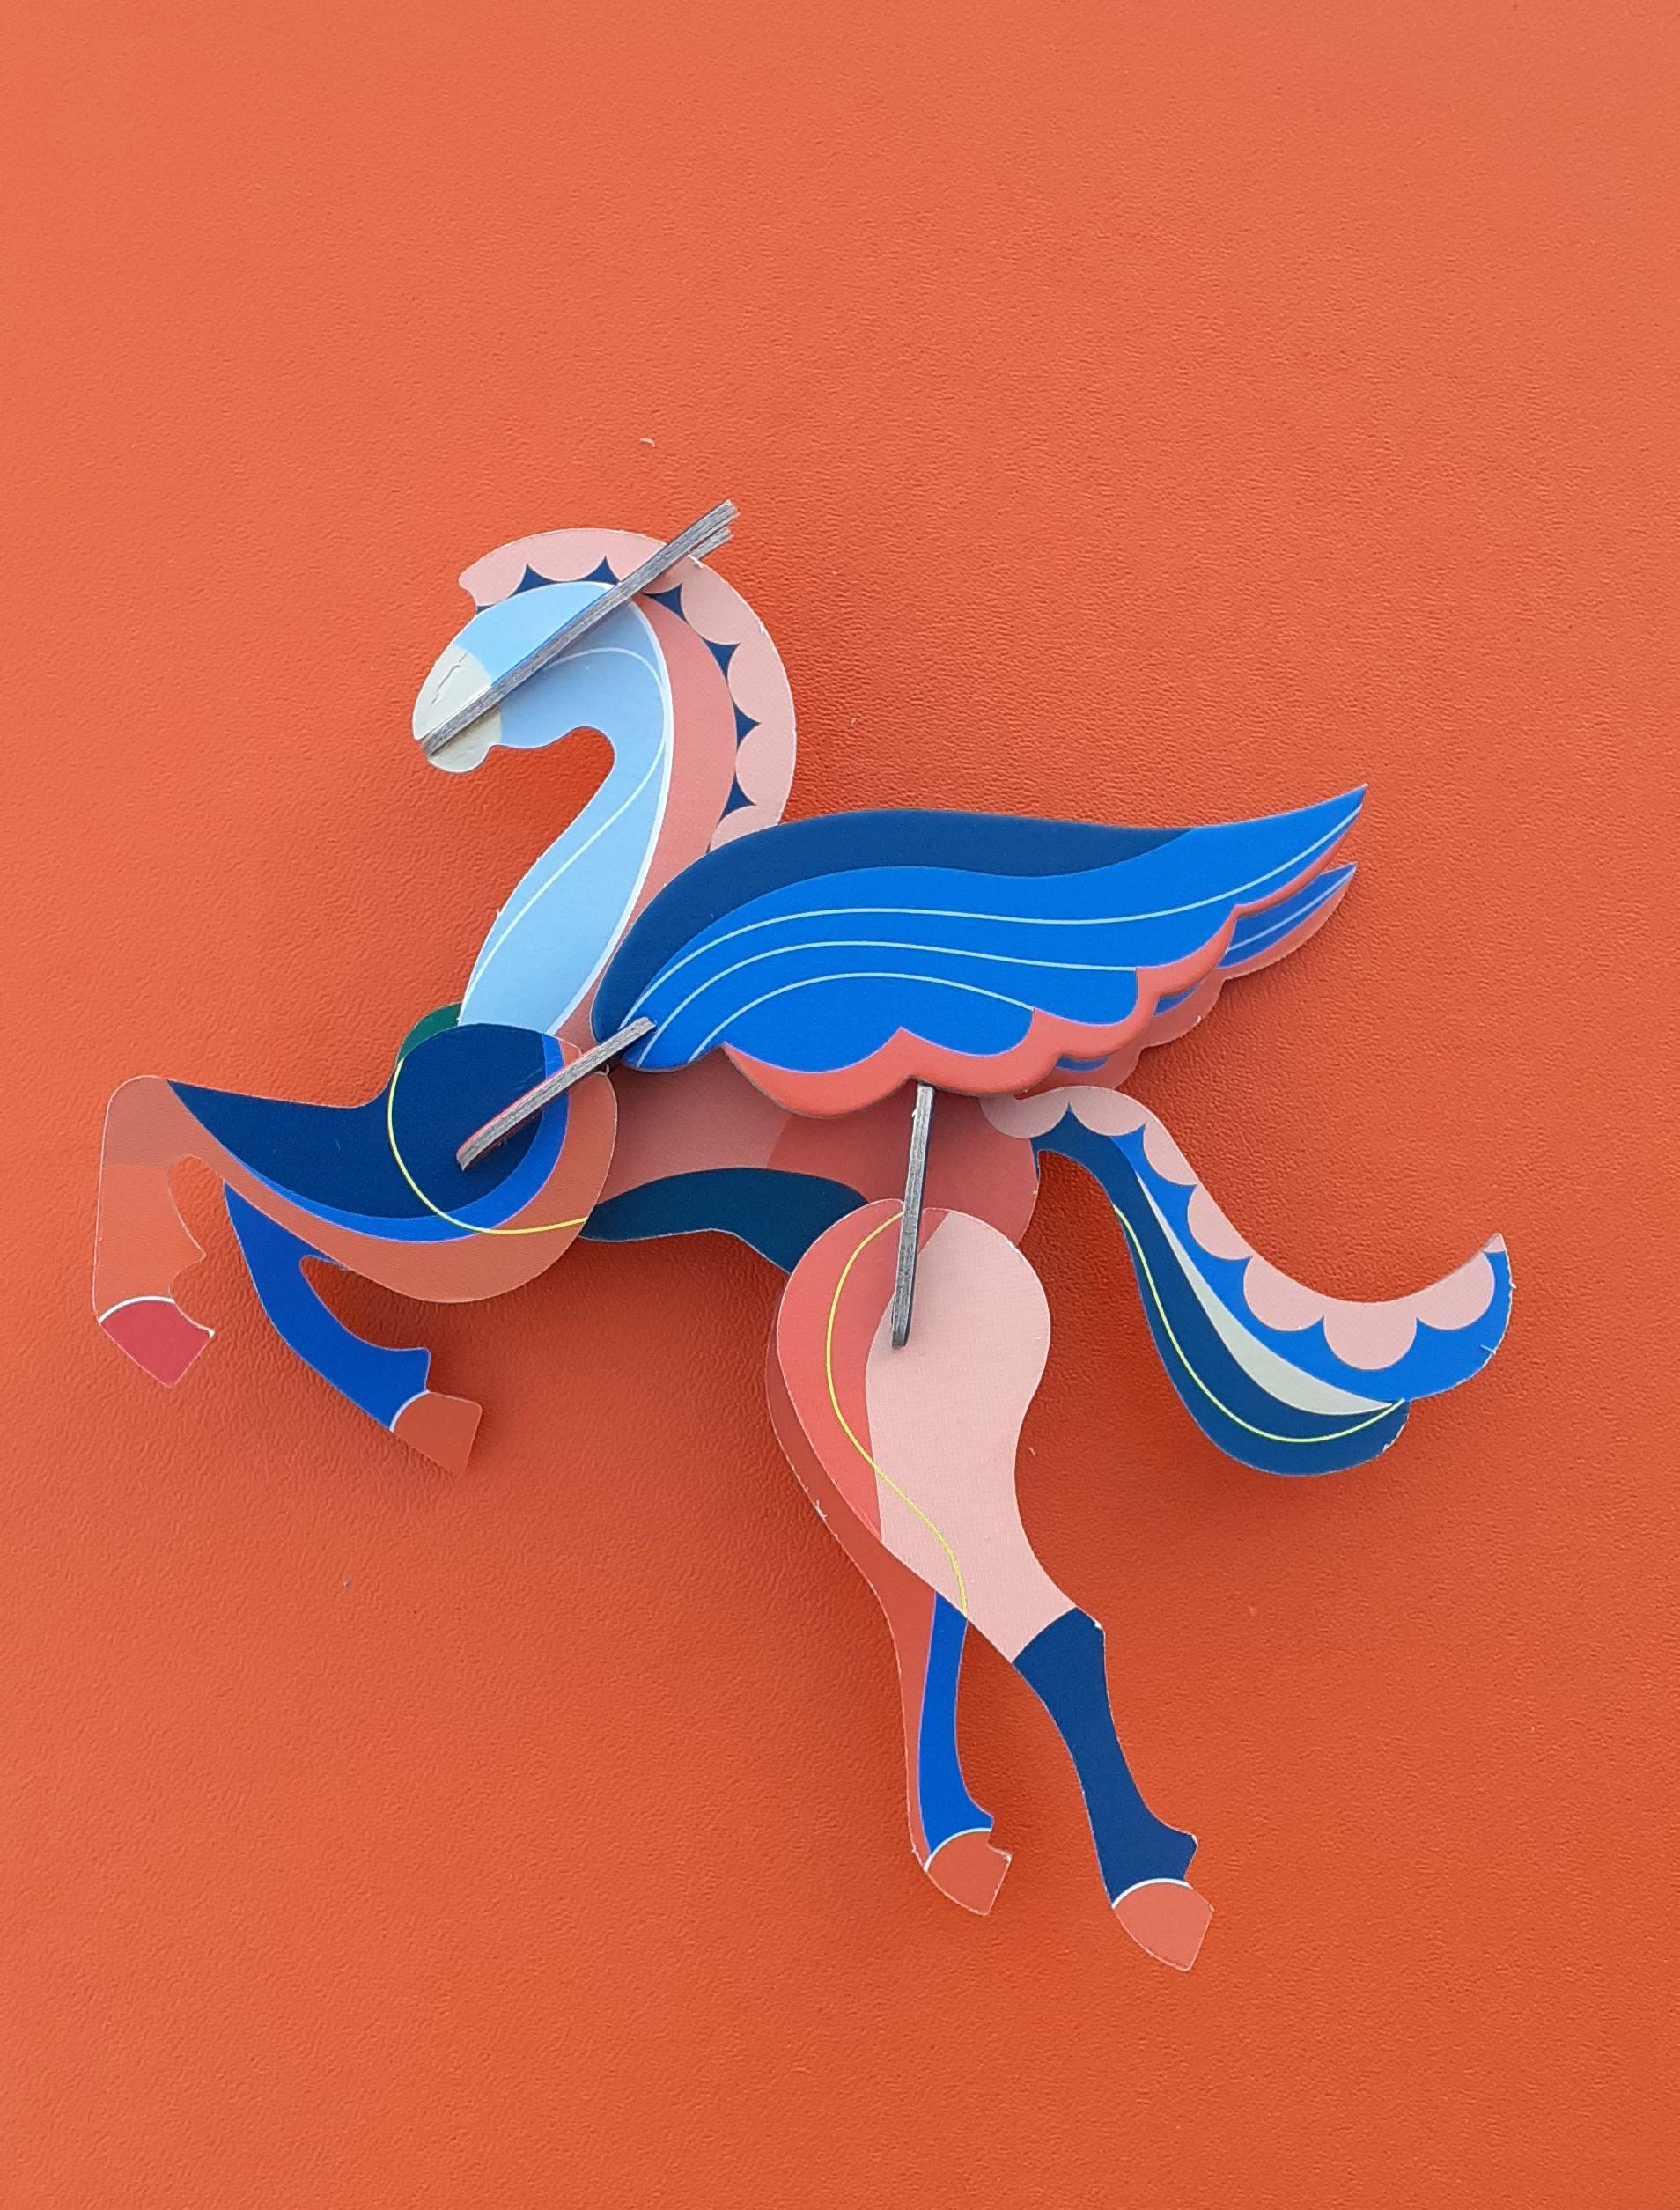 Hermès Pegasus Le Pégase Cheval Ailé Winged Horse in Cardboard to Hang For Sale 11